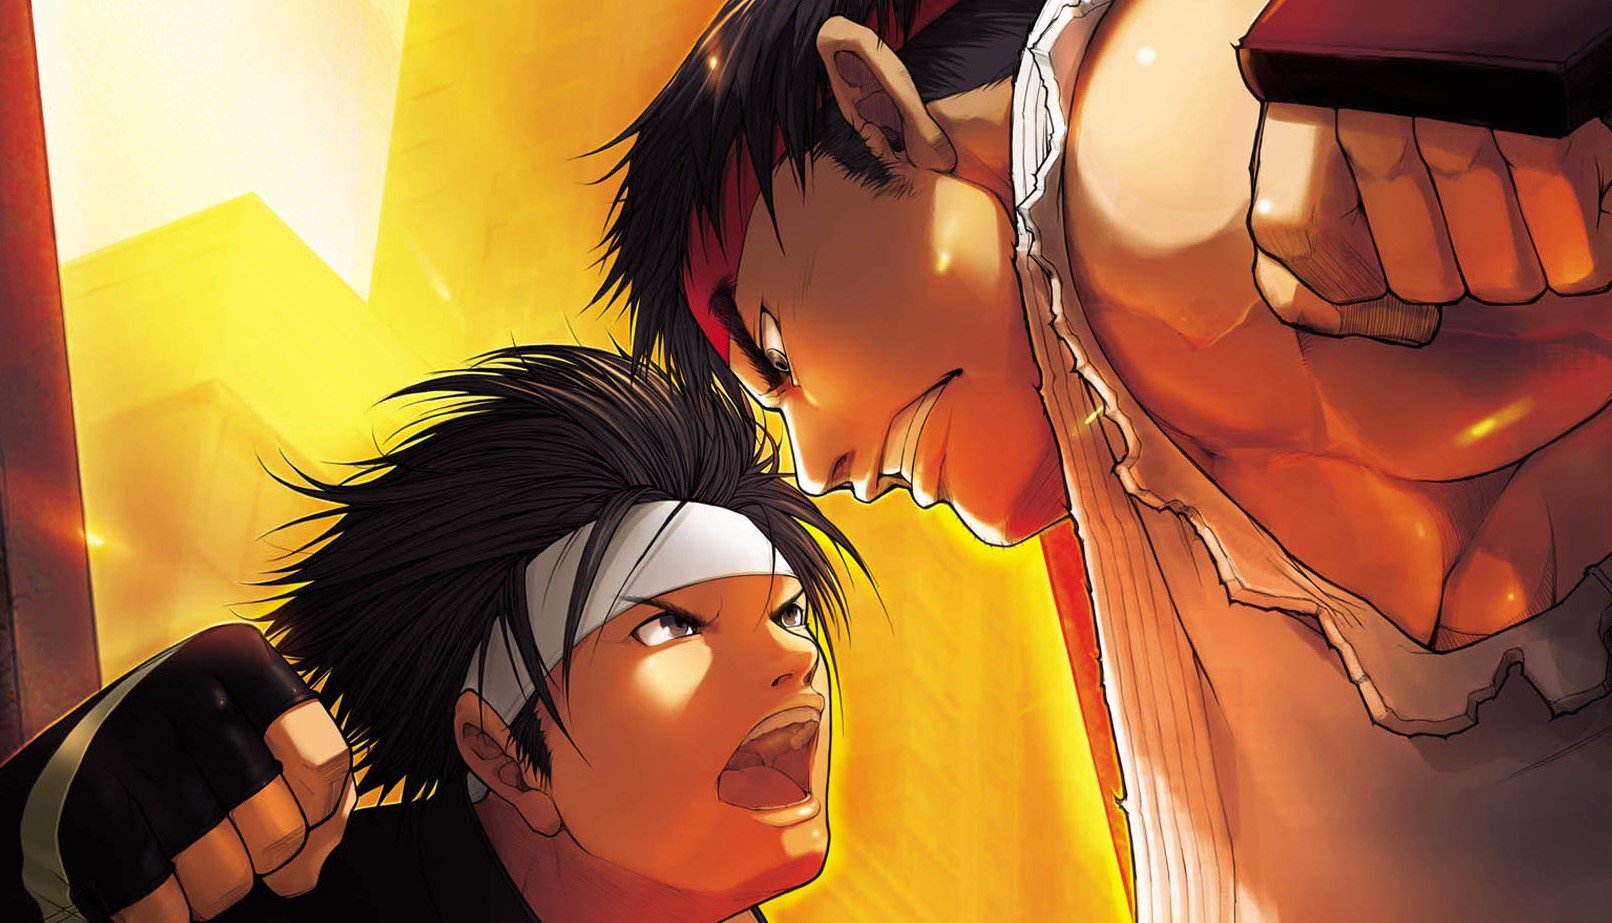 SNK vs Capcom 3 is something 'both parties' are interested in